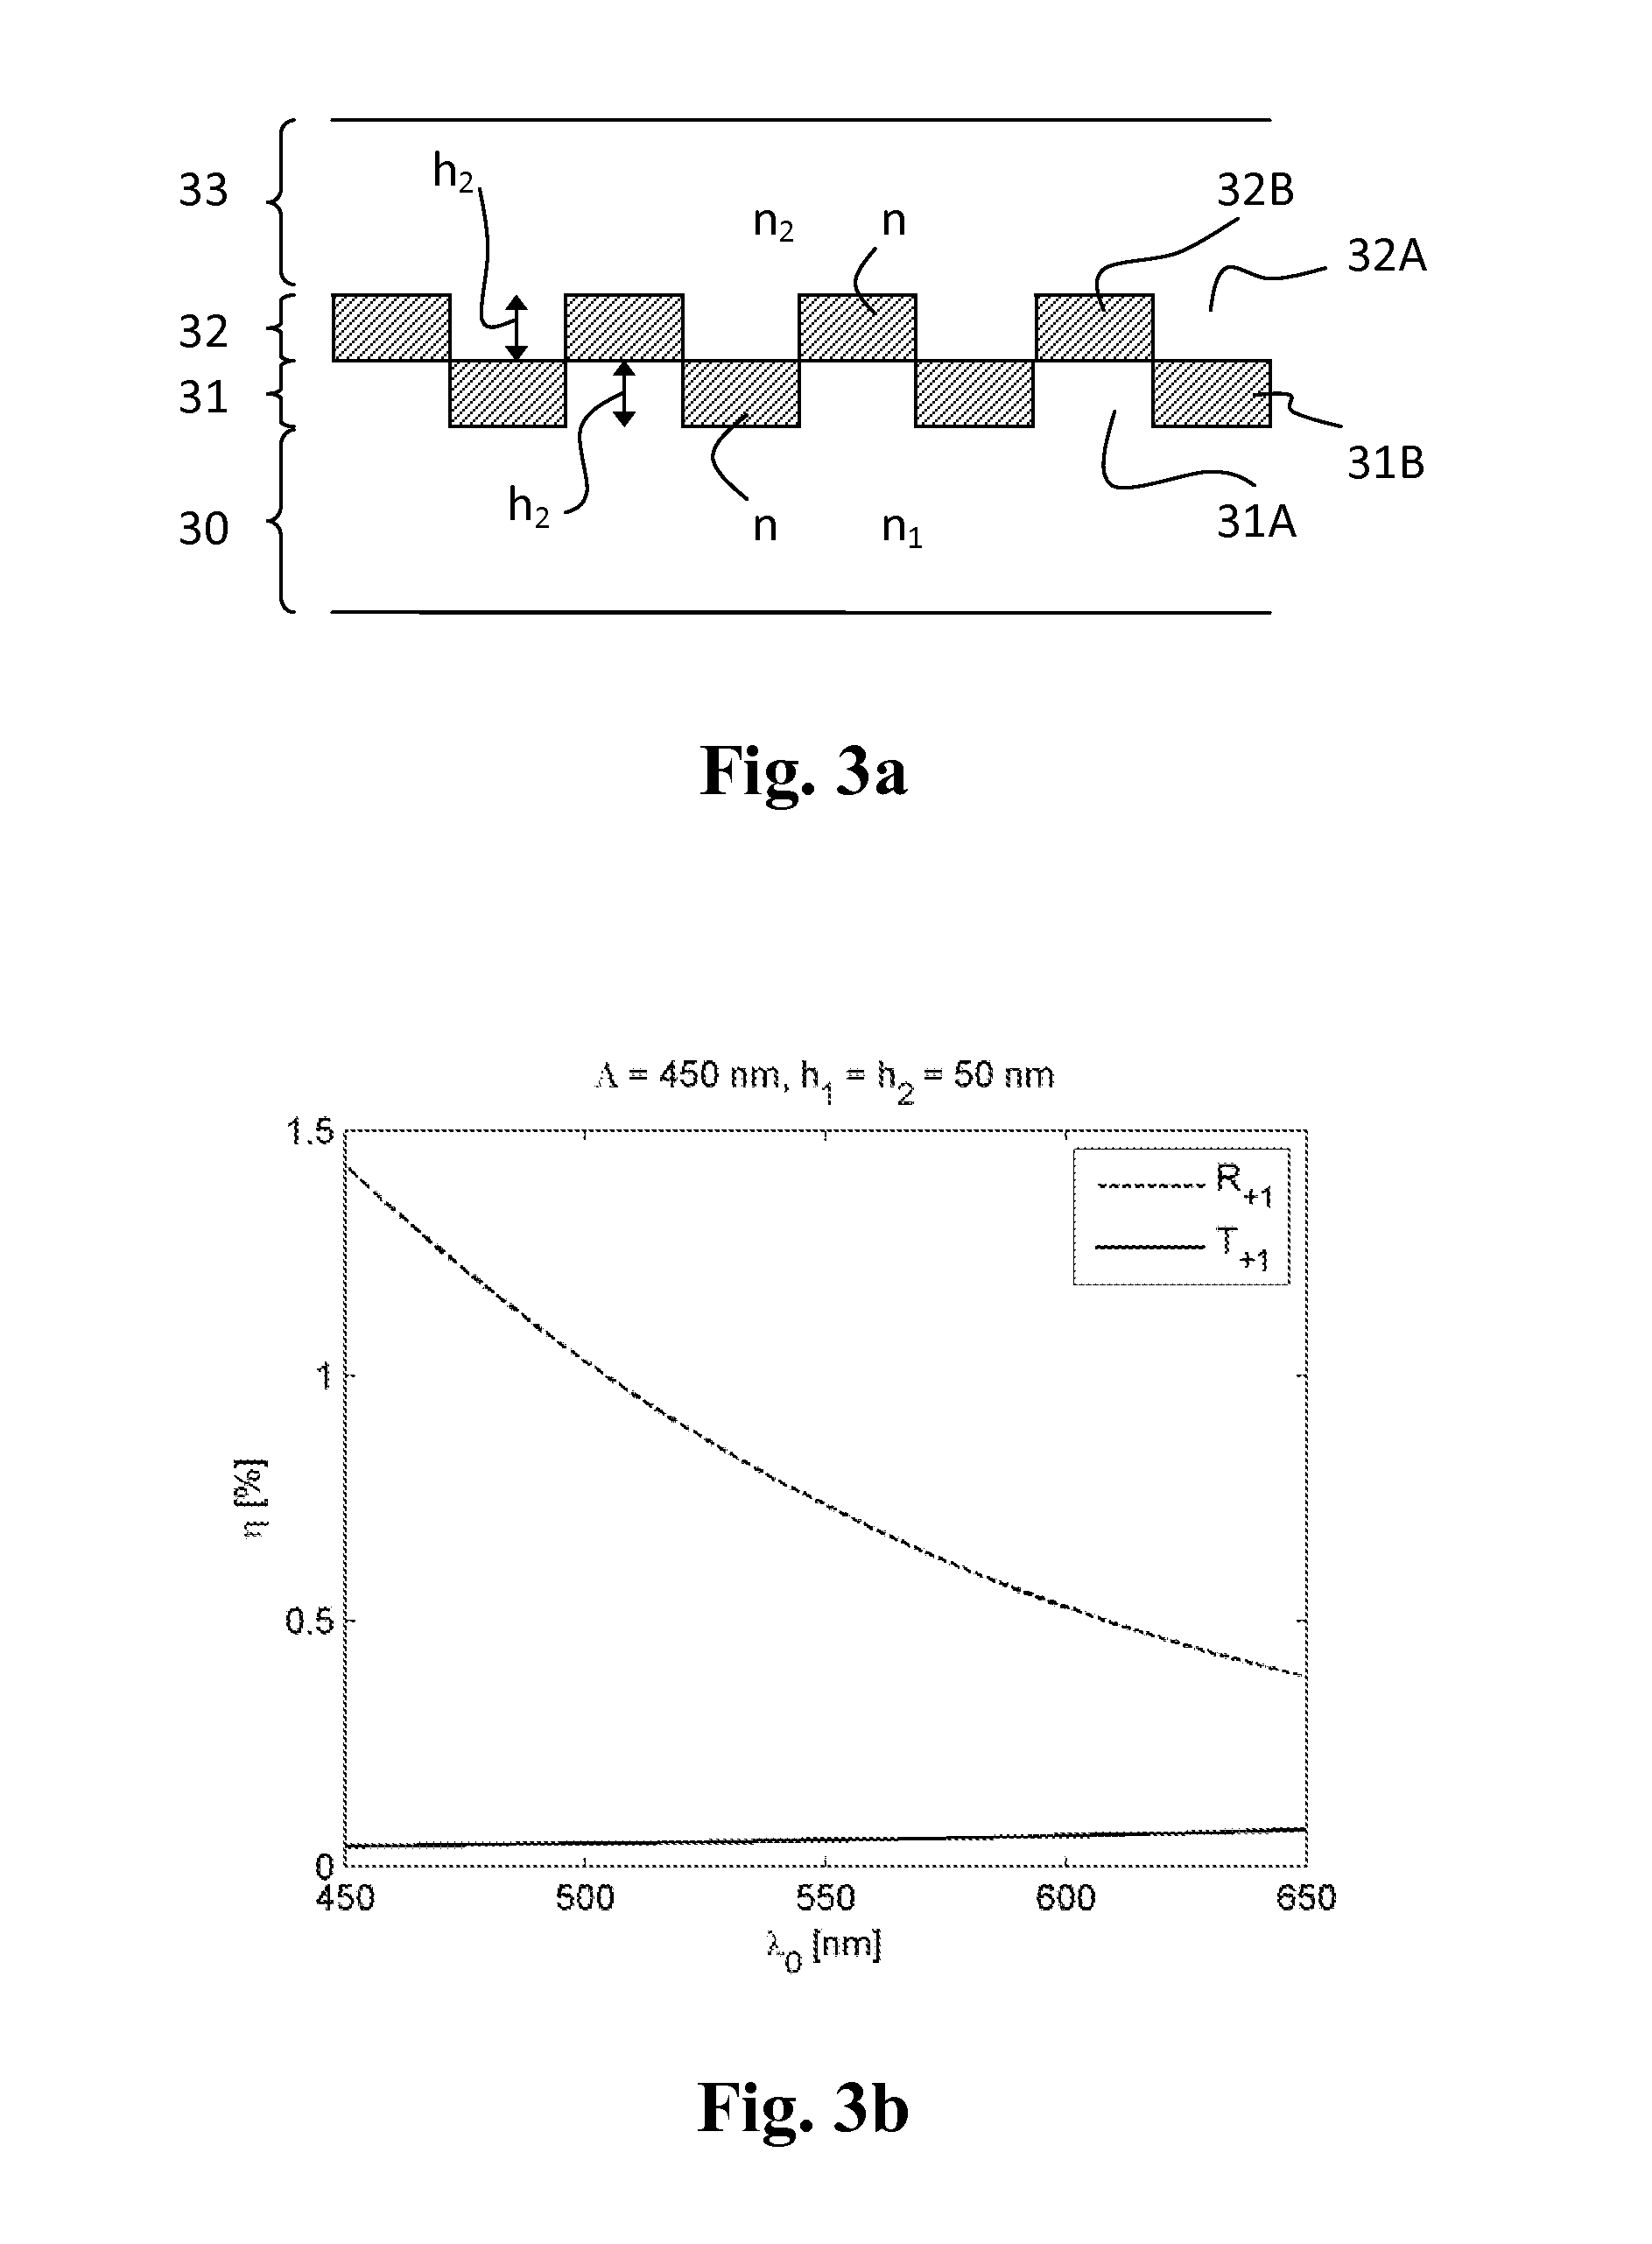 Optical device with diffractive grating